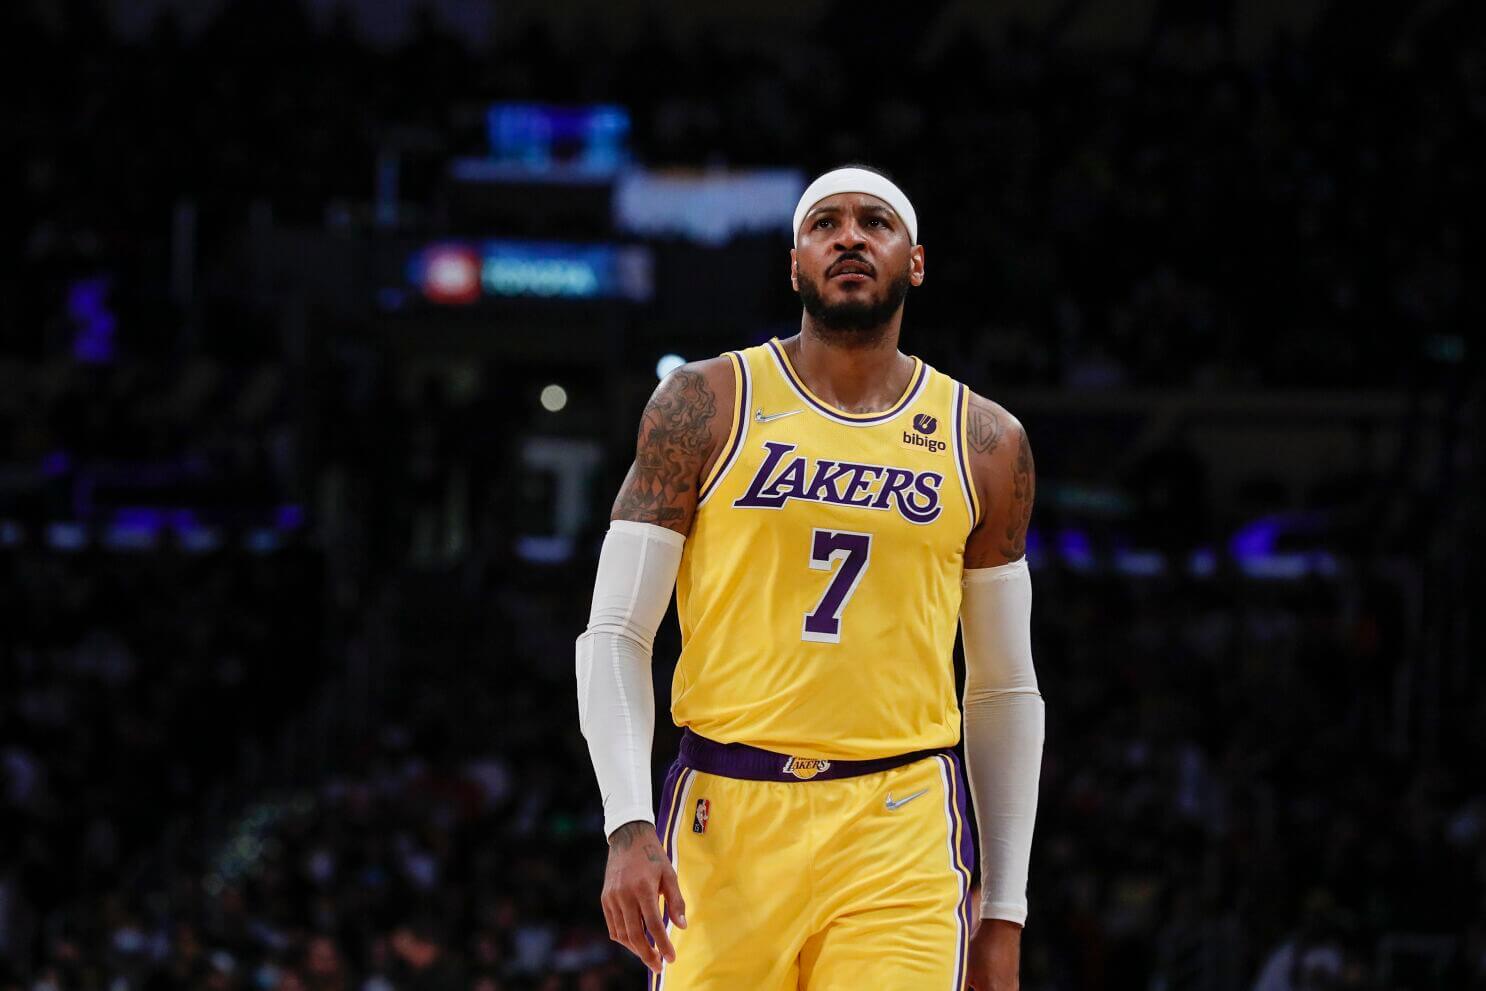 NBA Star Carmelo Anthony Announces Retirement, Leaving a Lasting Legacy